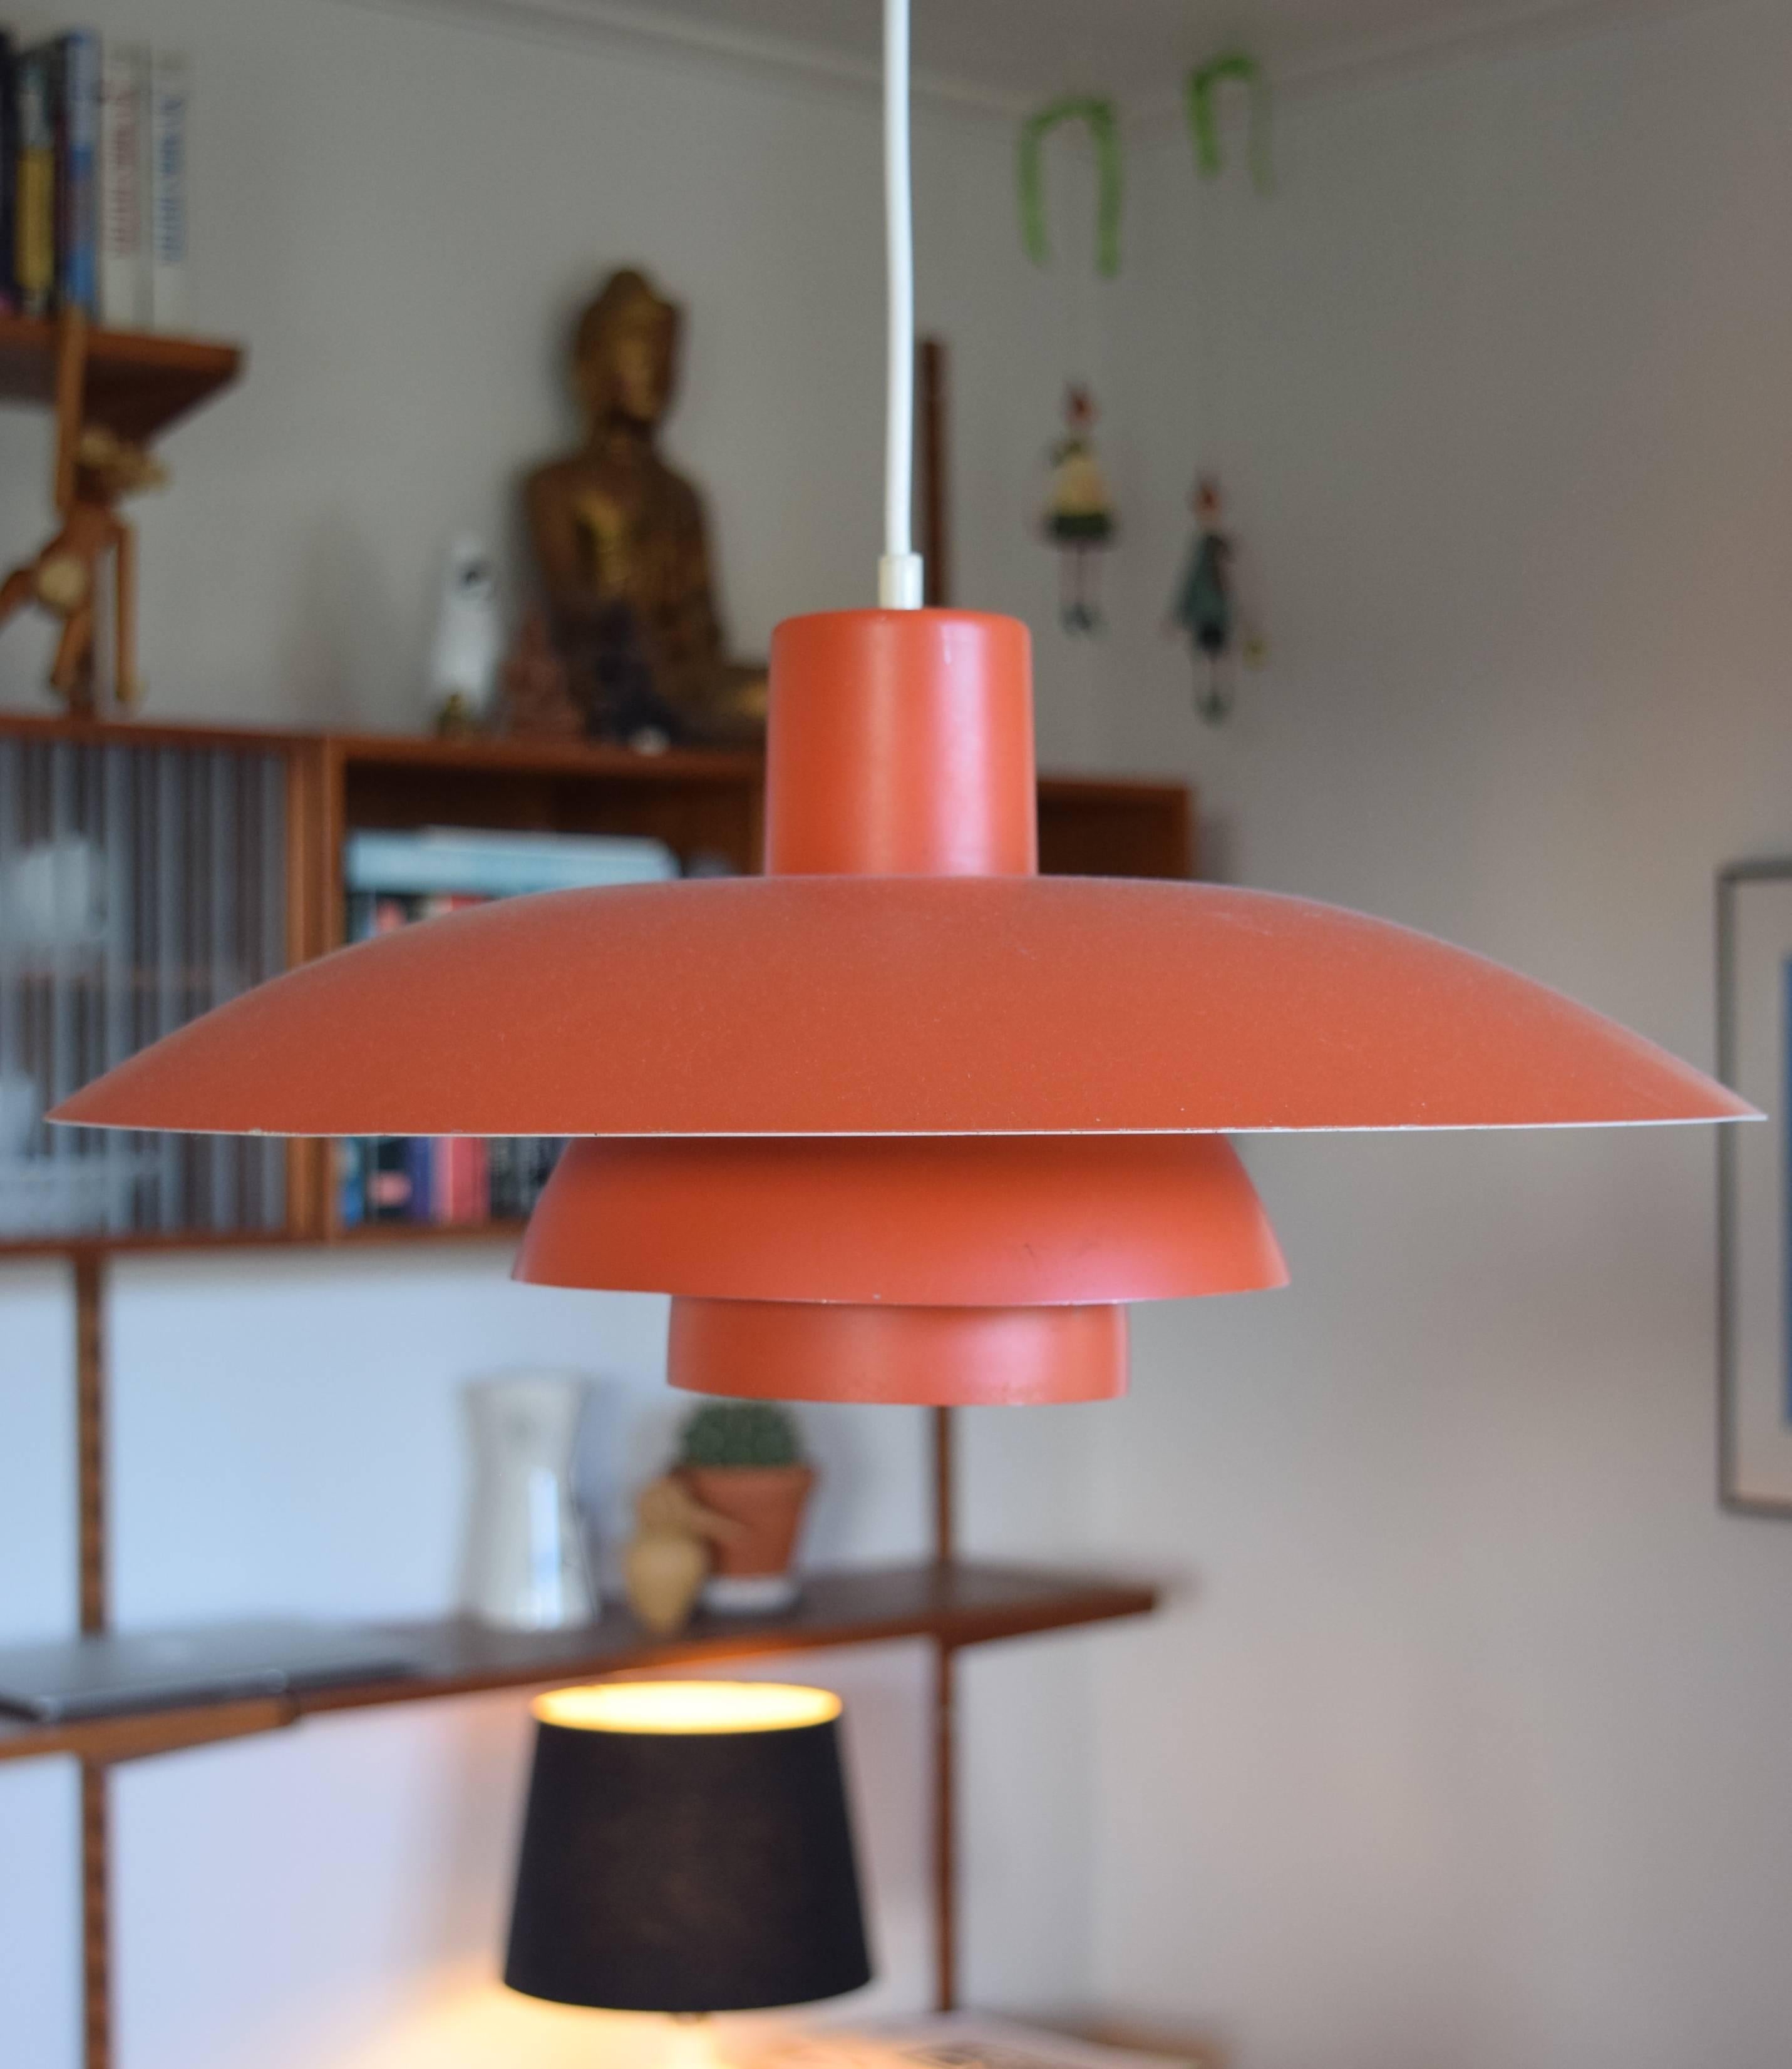 Iconic PH4 lamp designed by Poul Henningsen for Louis Poulsen. Original red finish. This is an earlier model and dates from the 1960s. Apart from a few small surface marks the lamp is in a very good vintage condition.